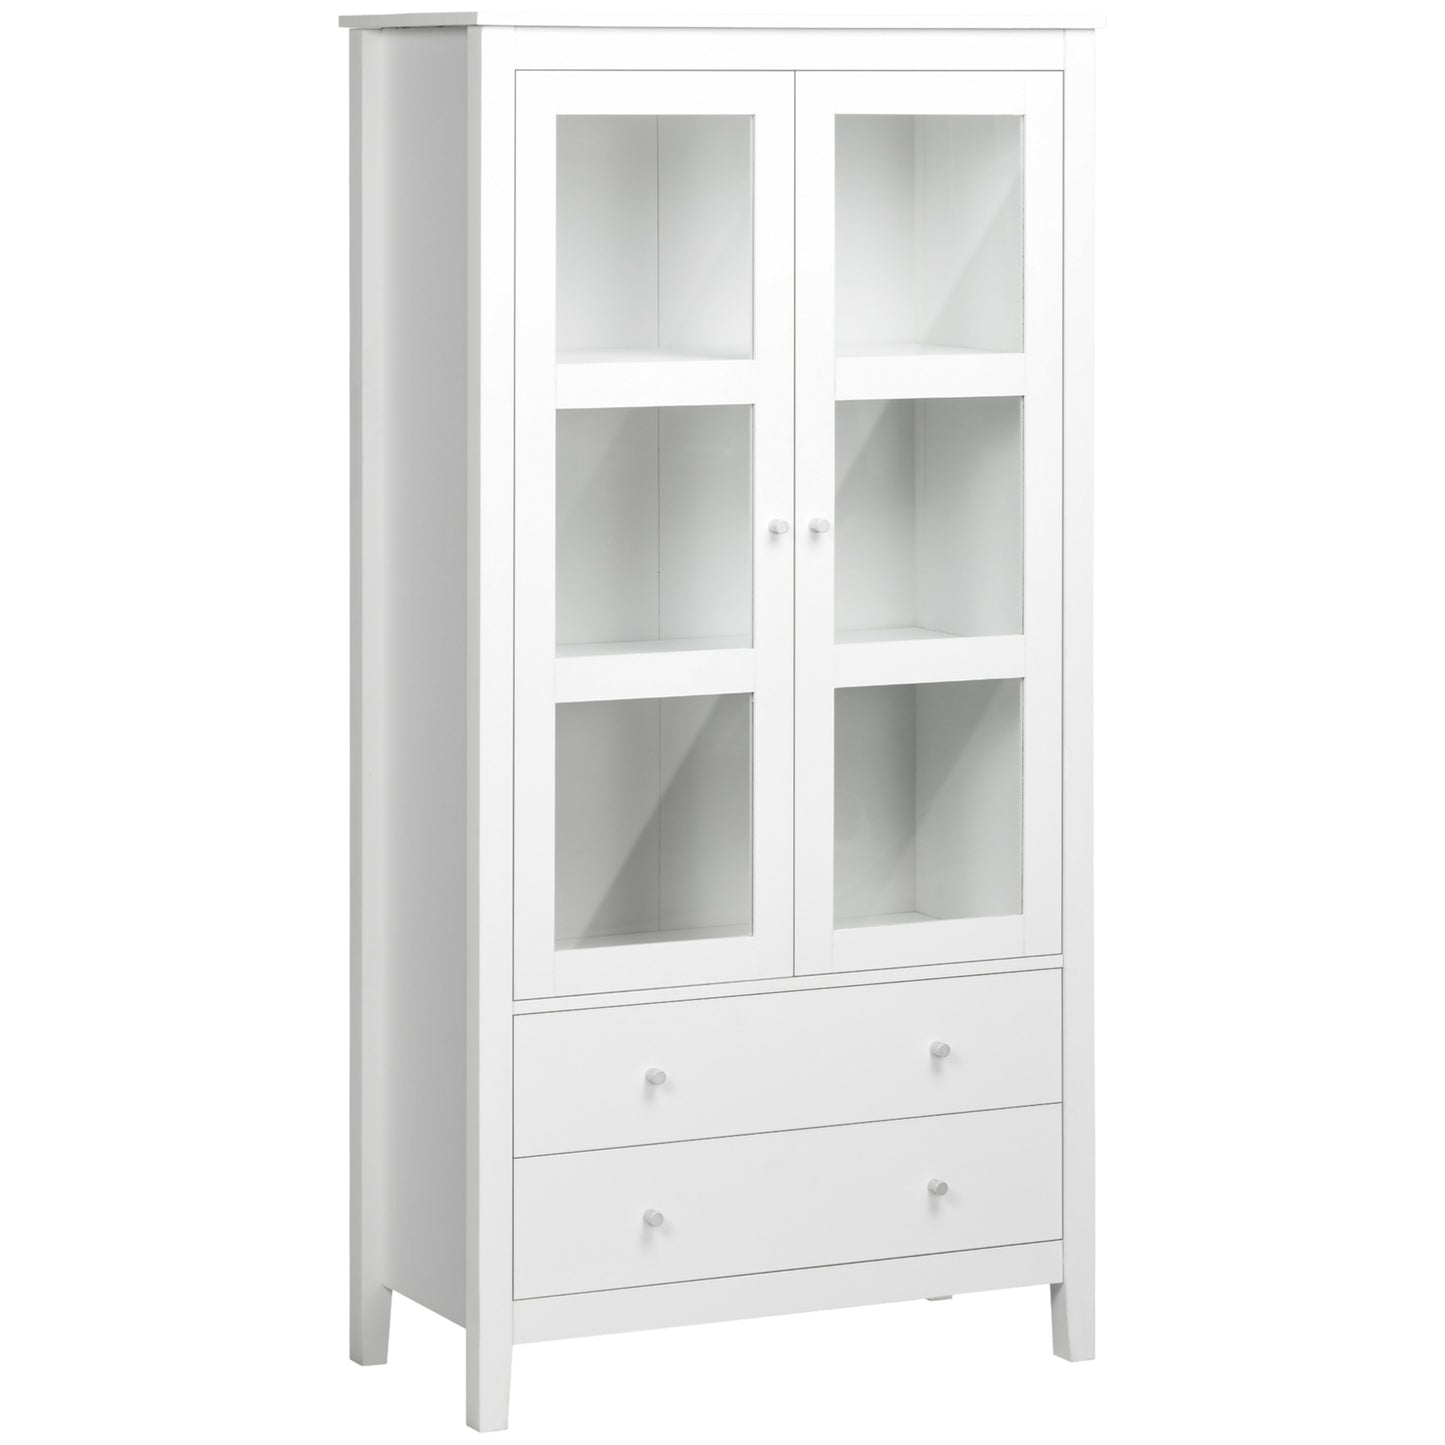 Kitchen Pantry Cabinet, Freestanding Storage Cabinet with 3-tier Shelves, 2 Drawers and Glass Doors, White